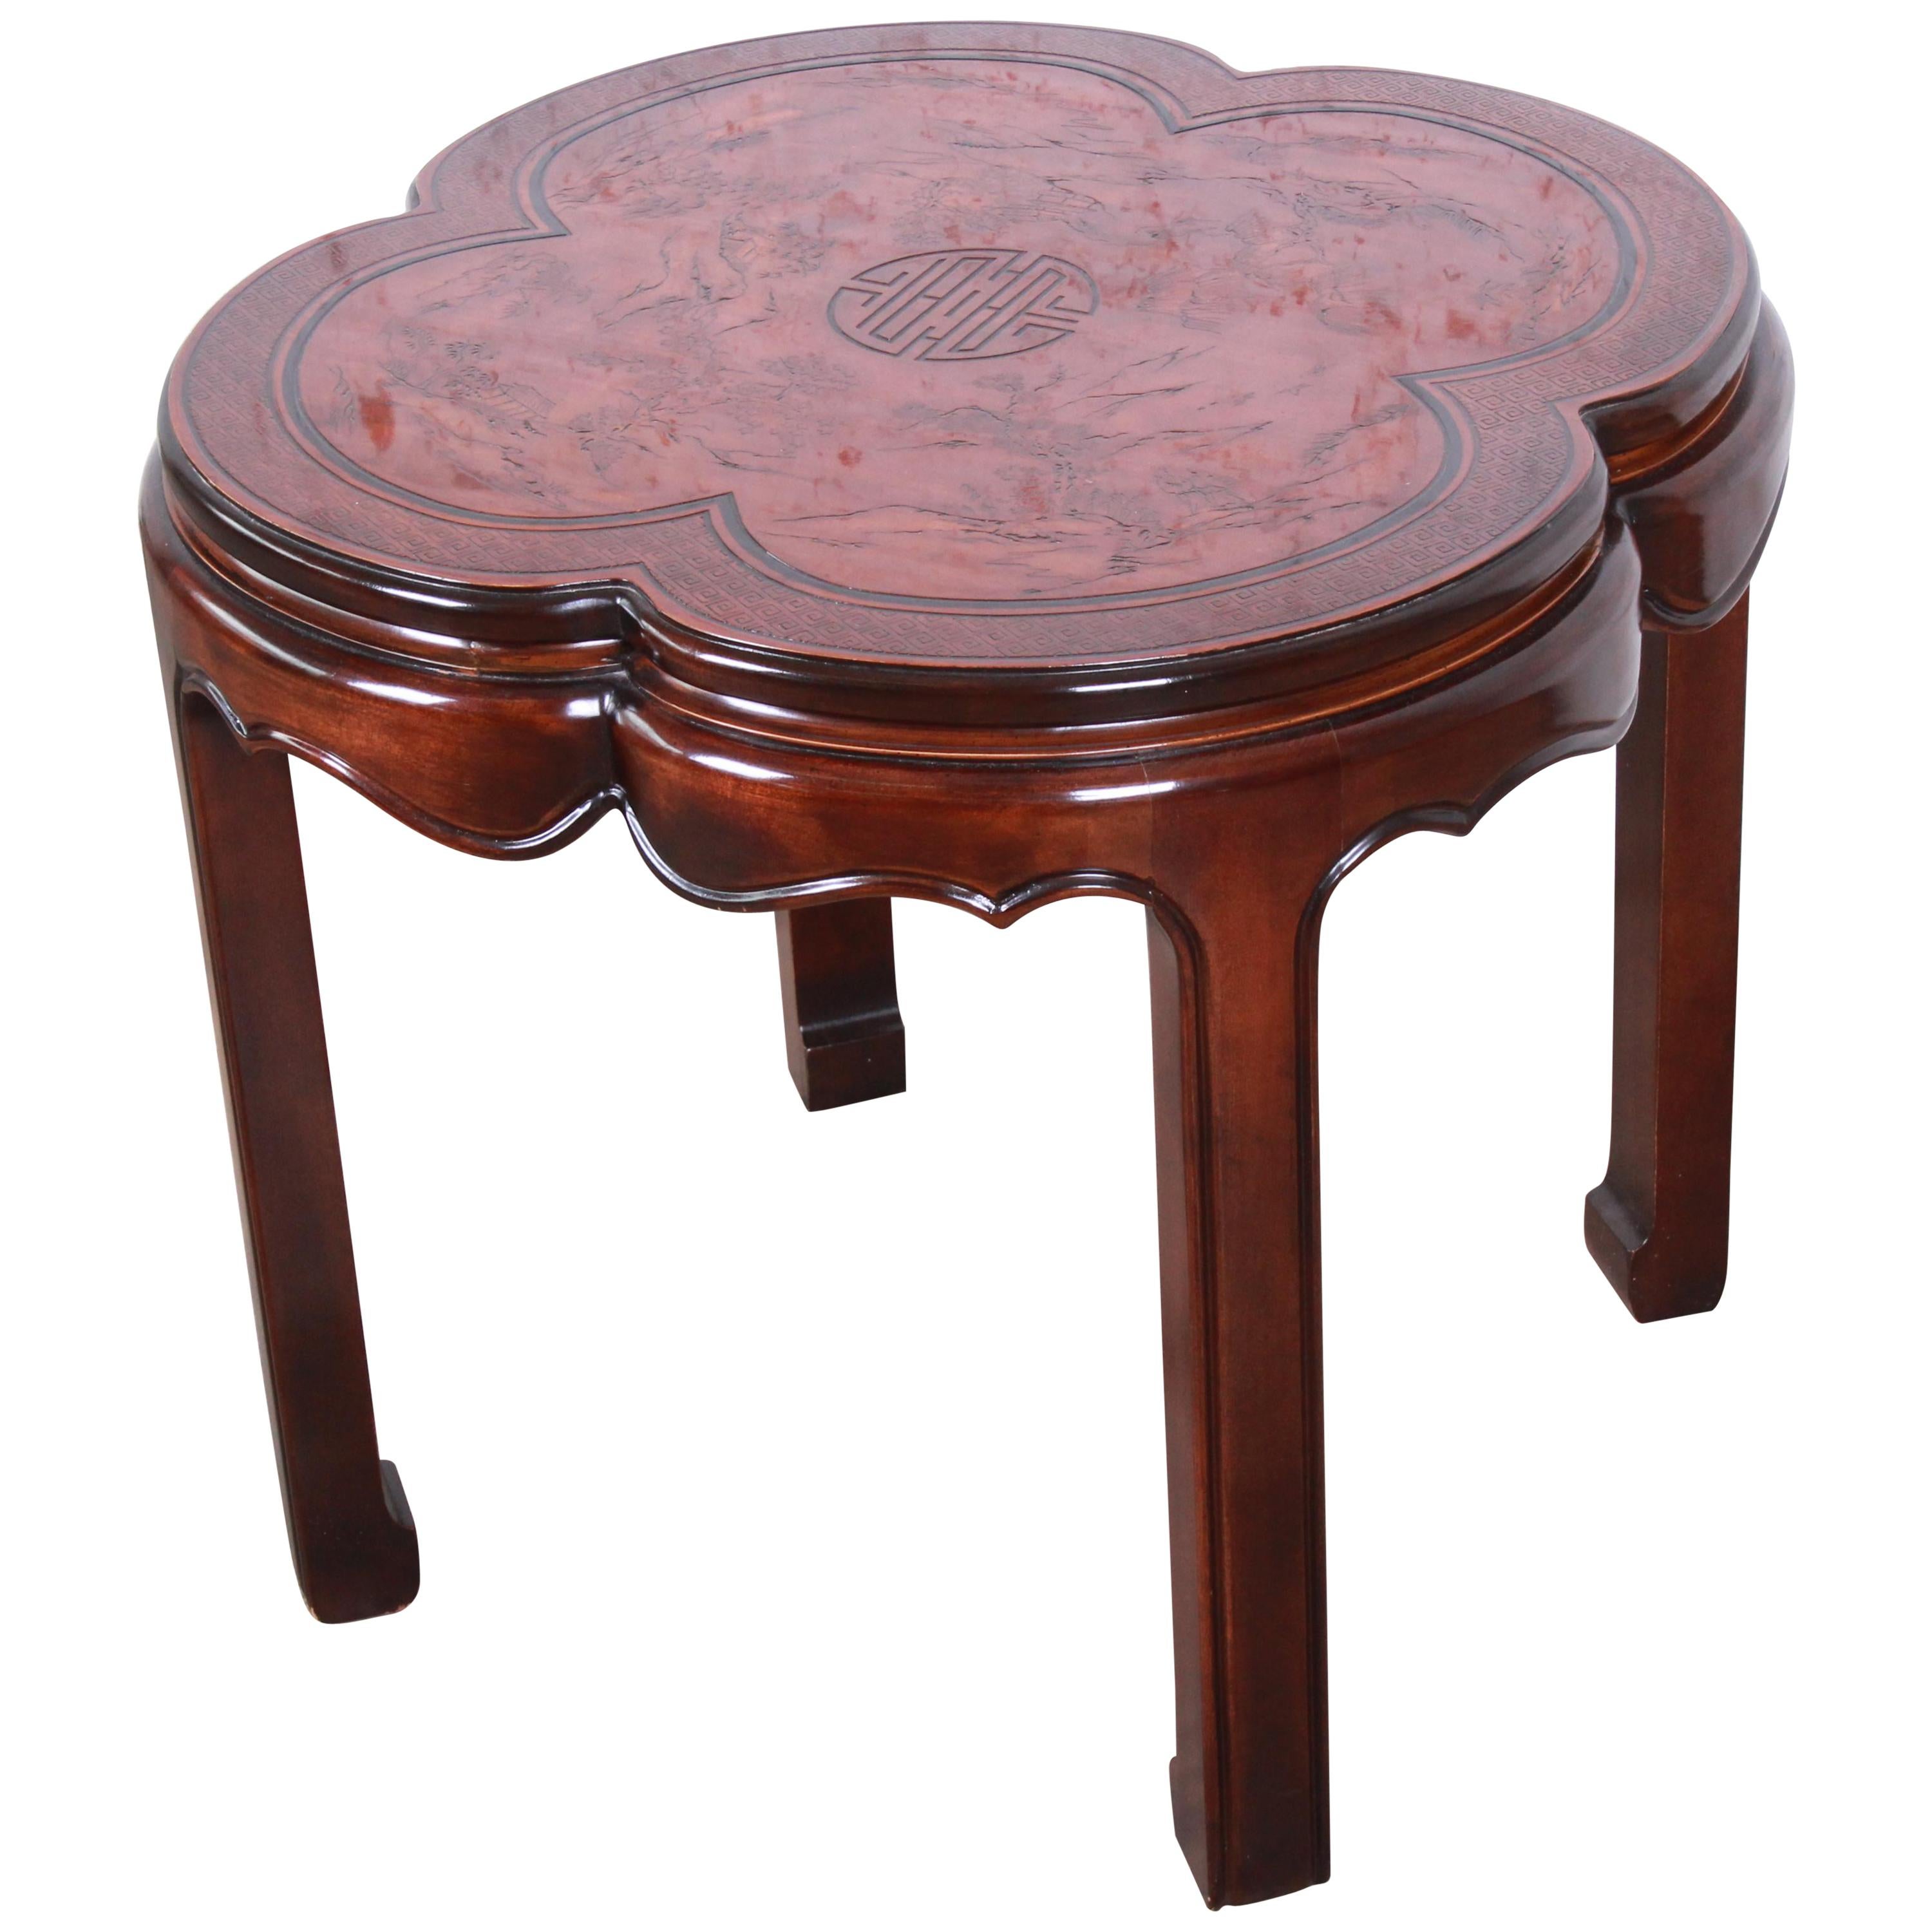 Drexel Heritage Carved Mahogany Hollywood Regency Clover-Shaped Occasional Table